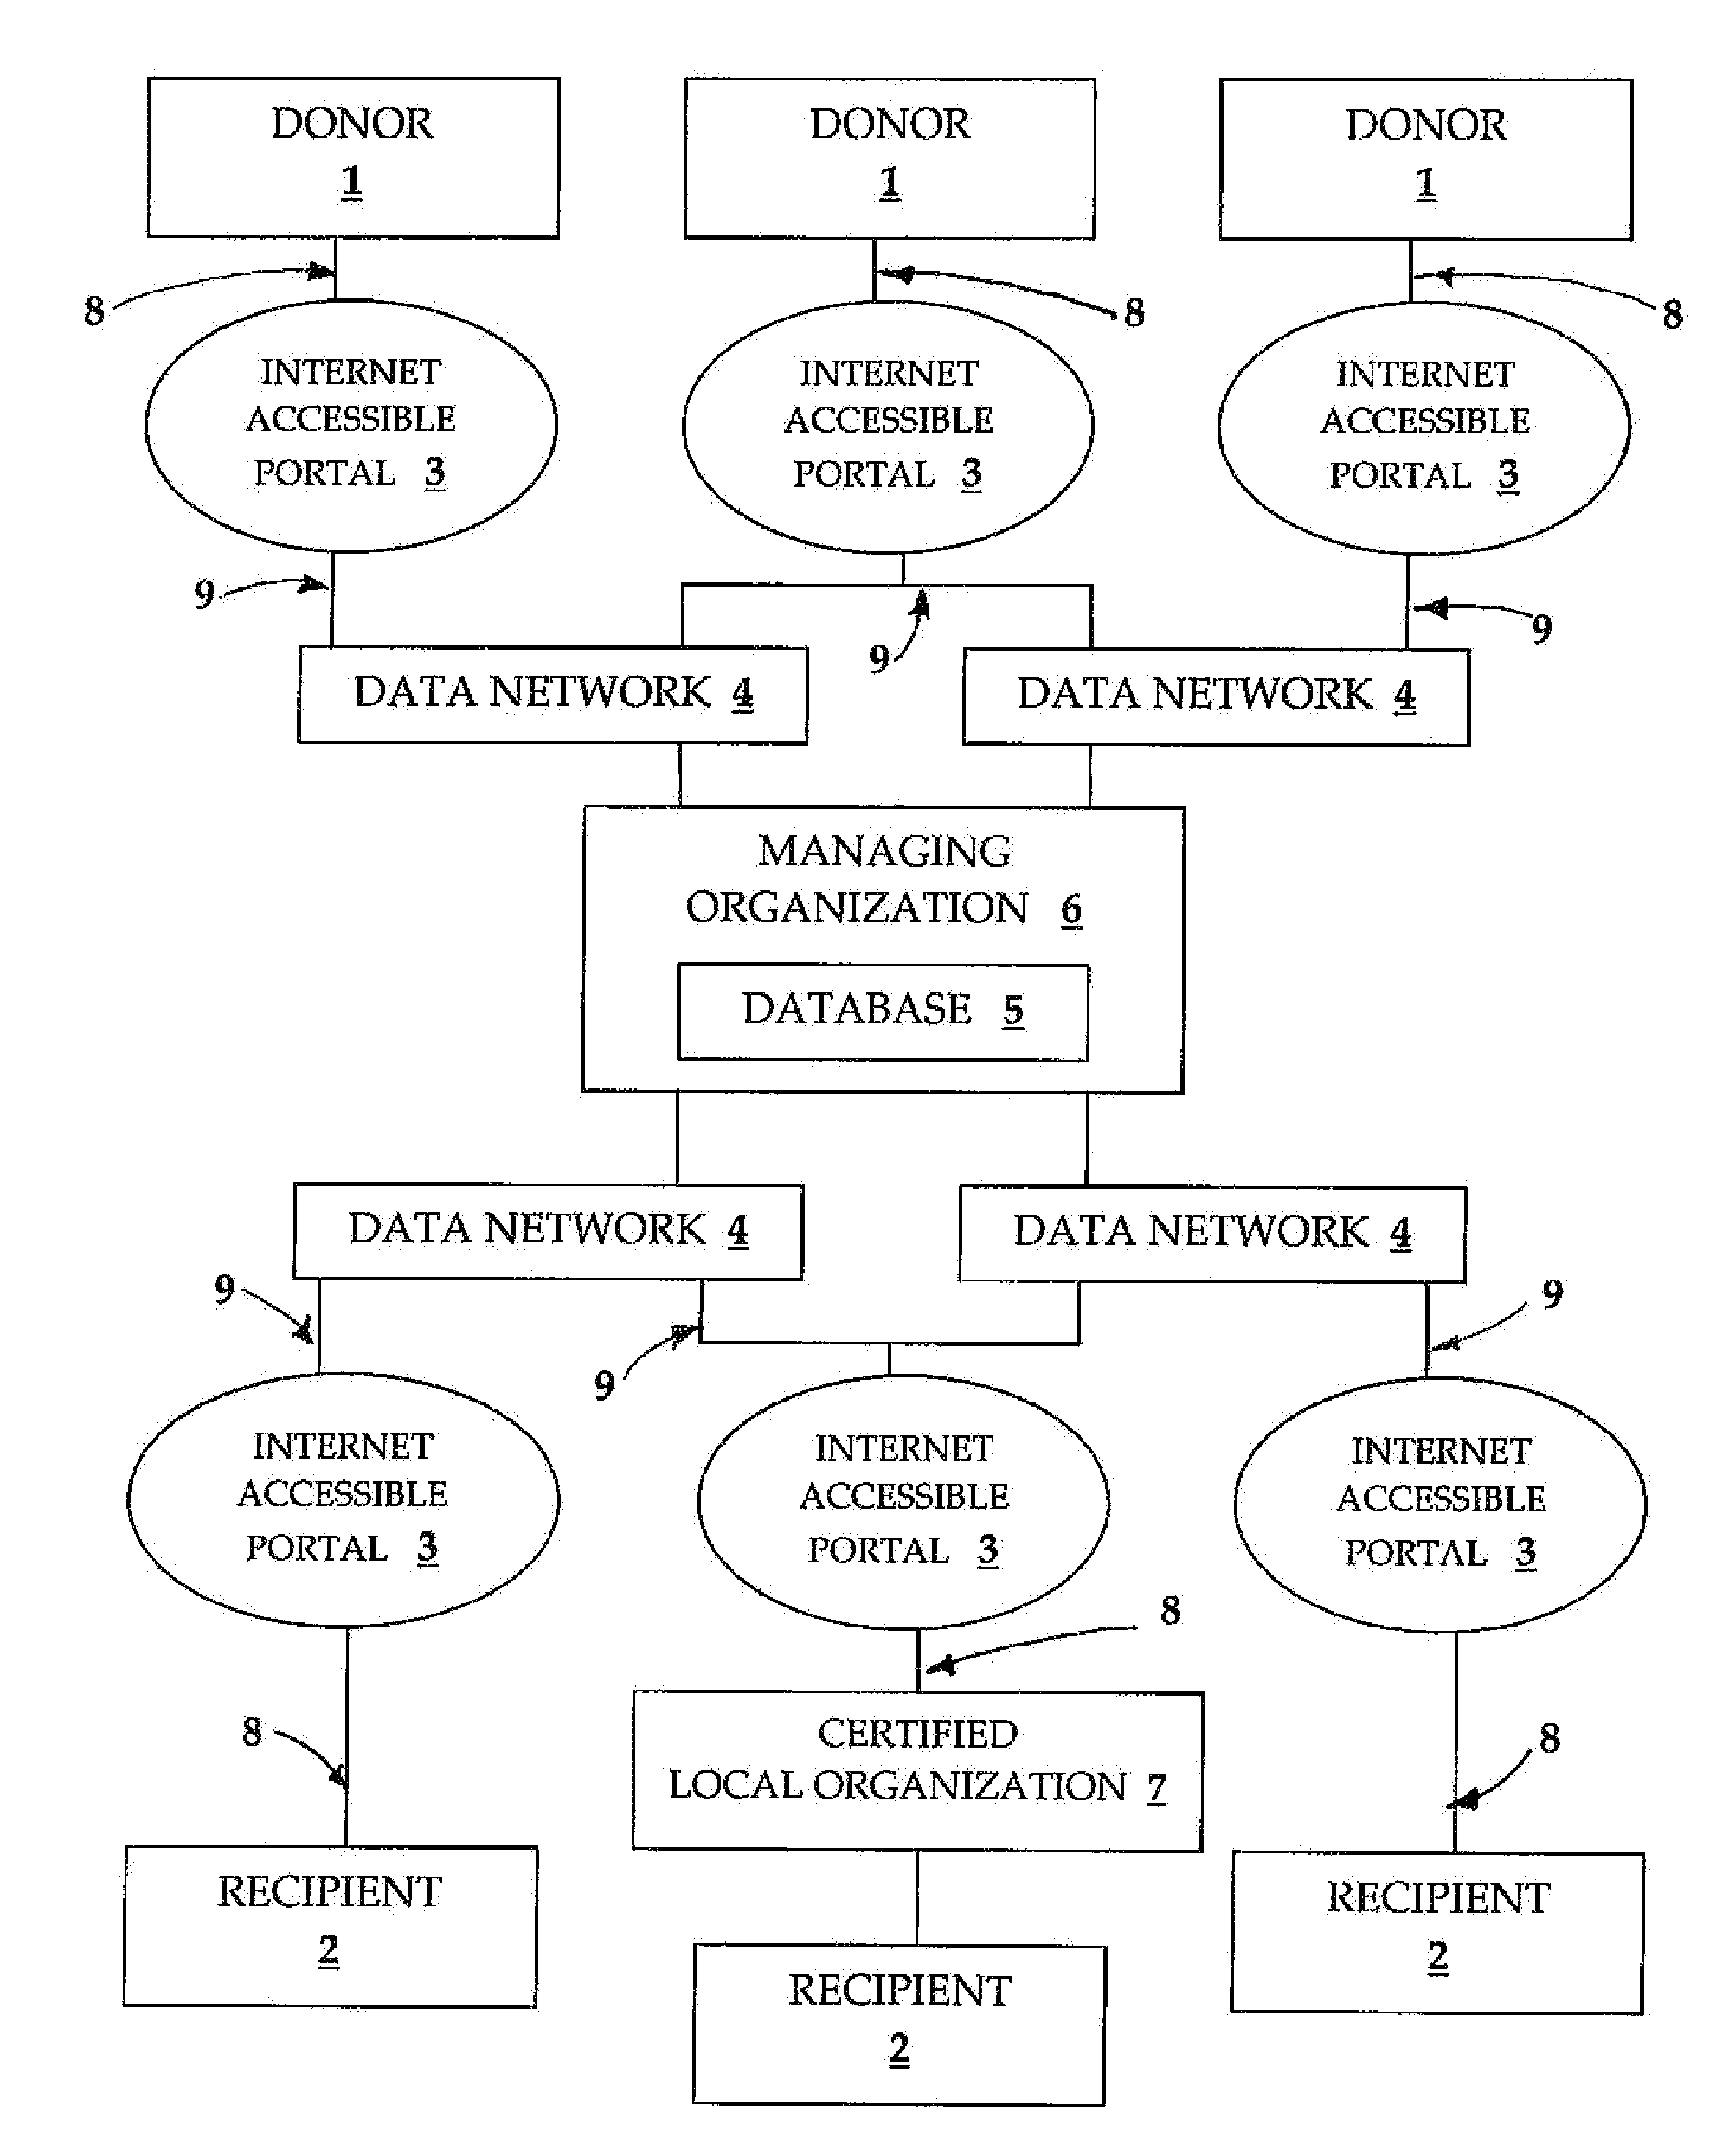 Method for facilitating the global donation of items and services